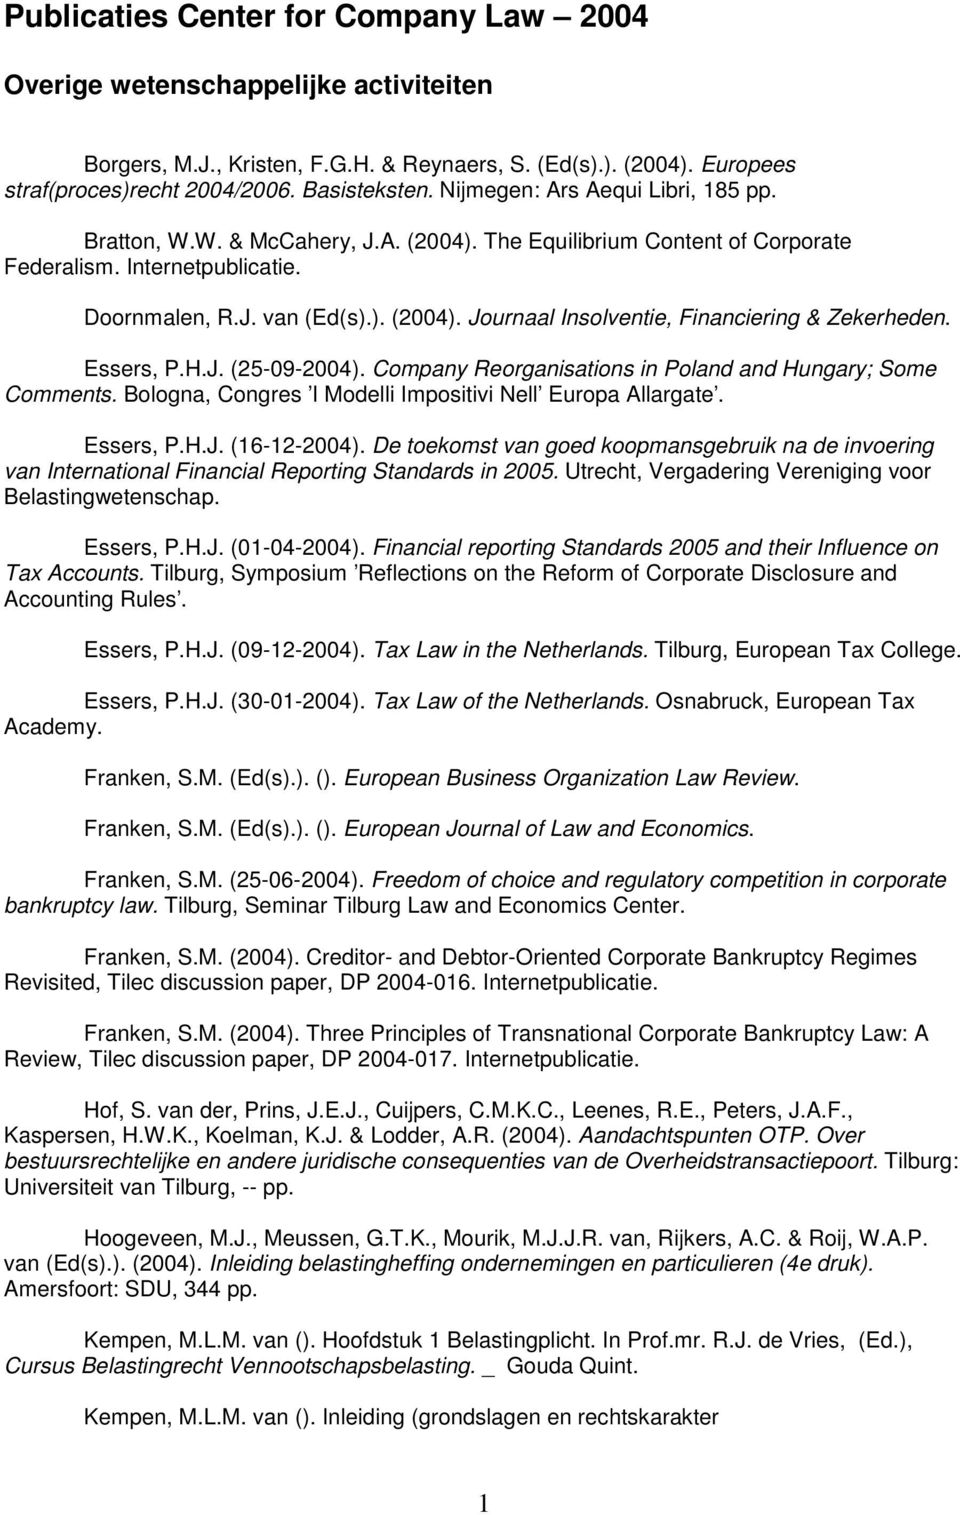 Essers, P.H.J. (25-09-2004). Company Reorganisations in Poland and Hungary; Some Comments. Bologna, Congres I Modelli Impositivi Nell Europa Allargate. Essers, P.H.J. (16-12-2004).